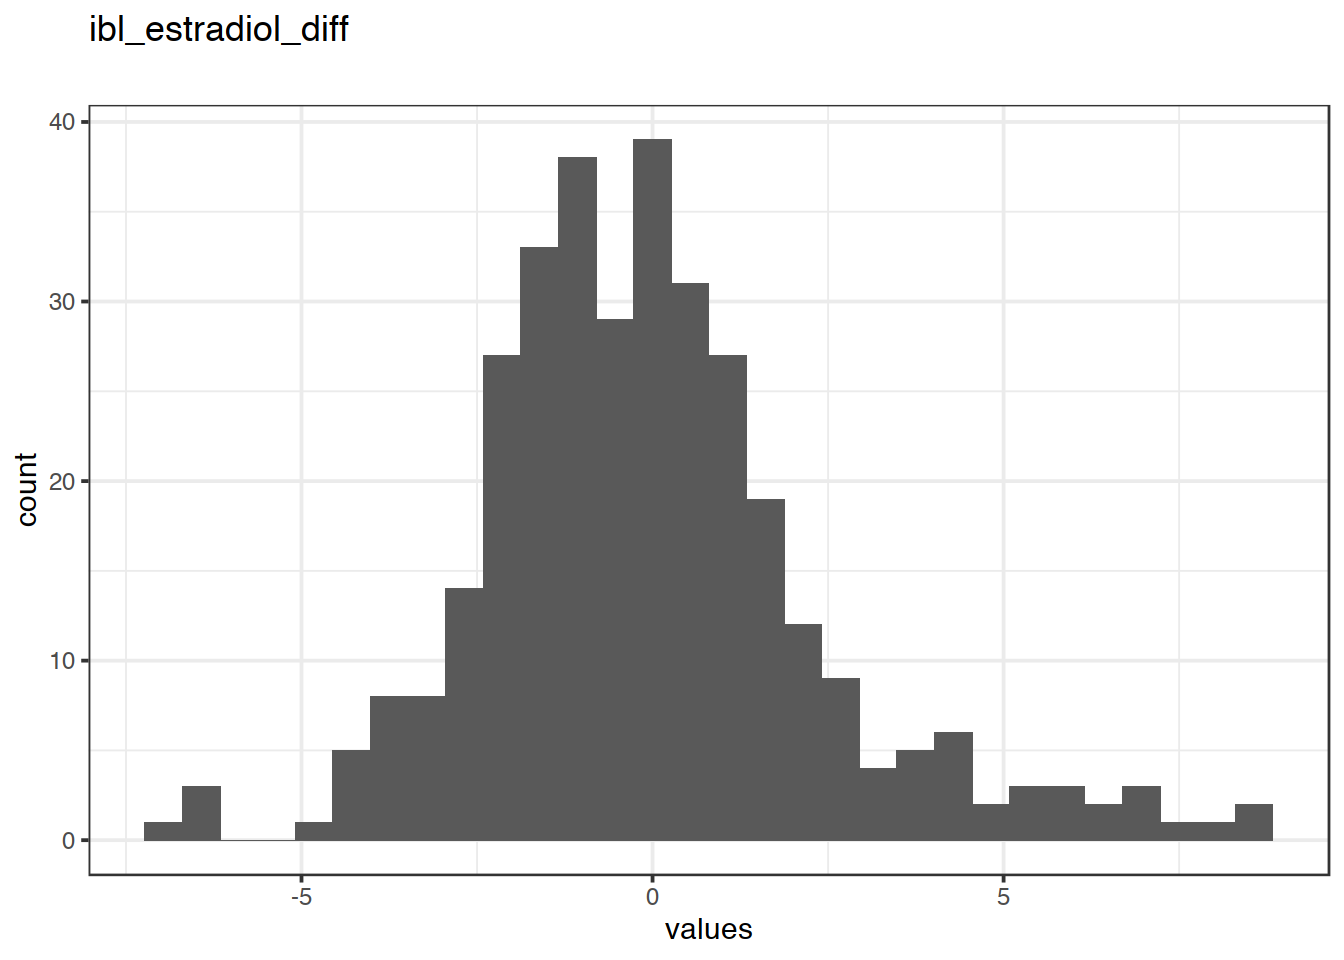 Distribution of values for ibl_estradiol_diff